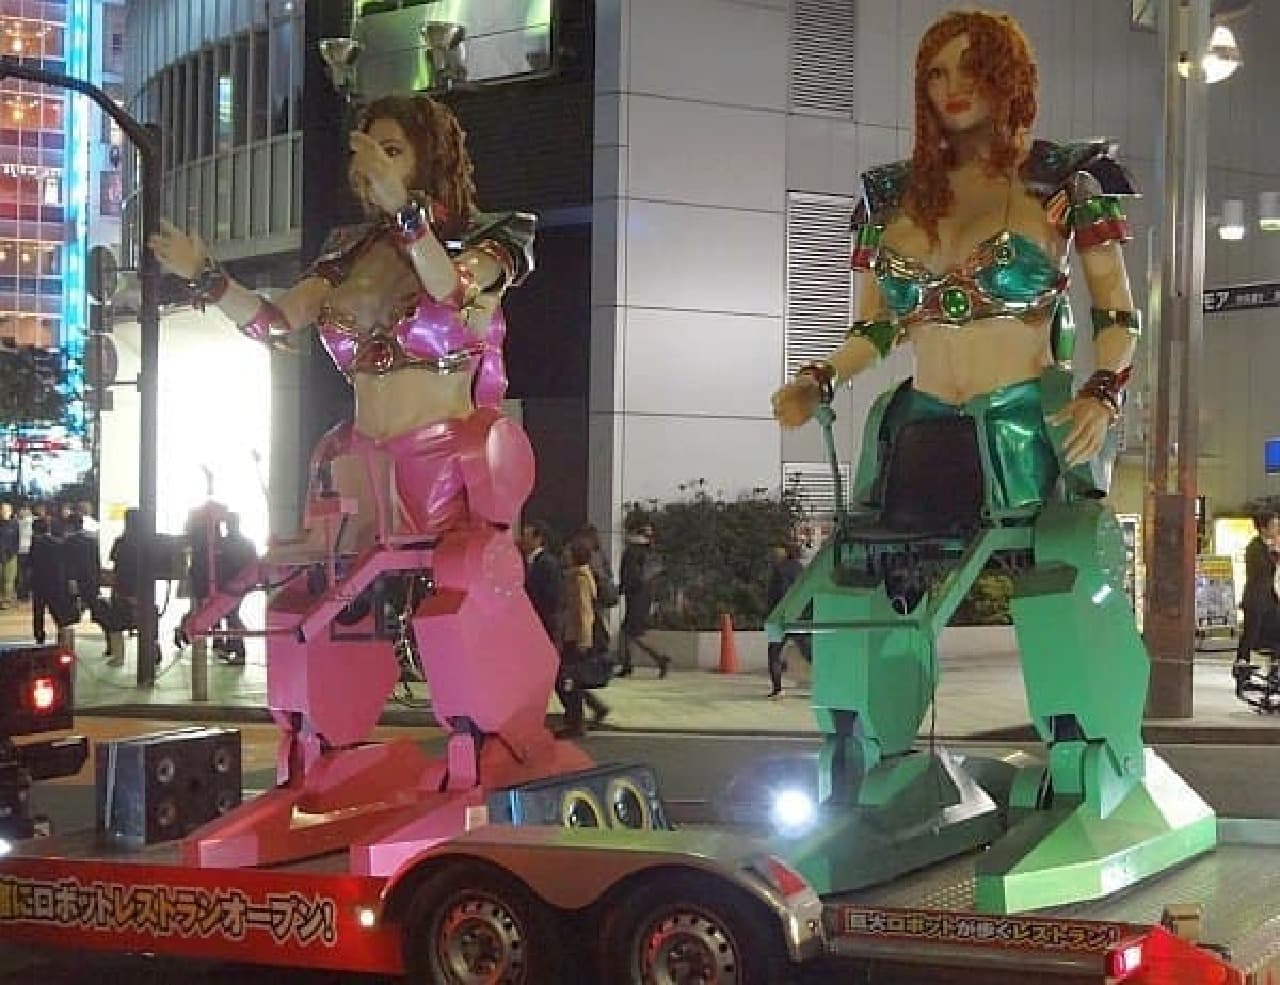 Performers (?) Of "Robot Restaurant" moving around the city of Tokyo